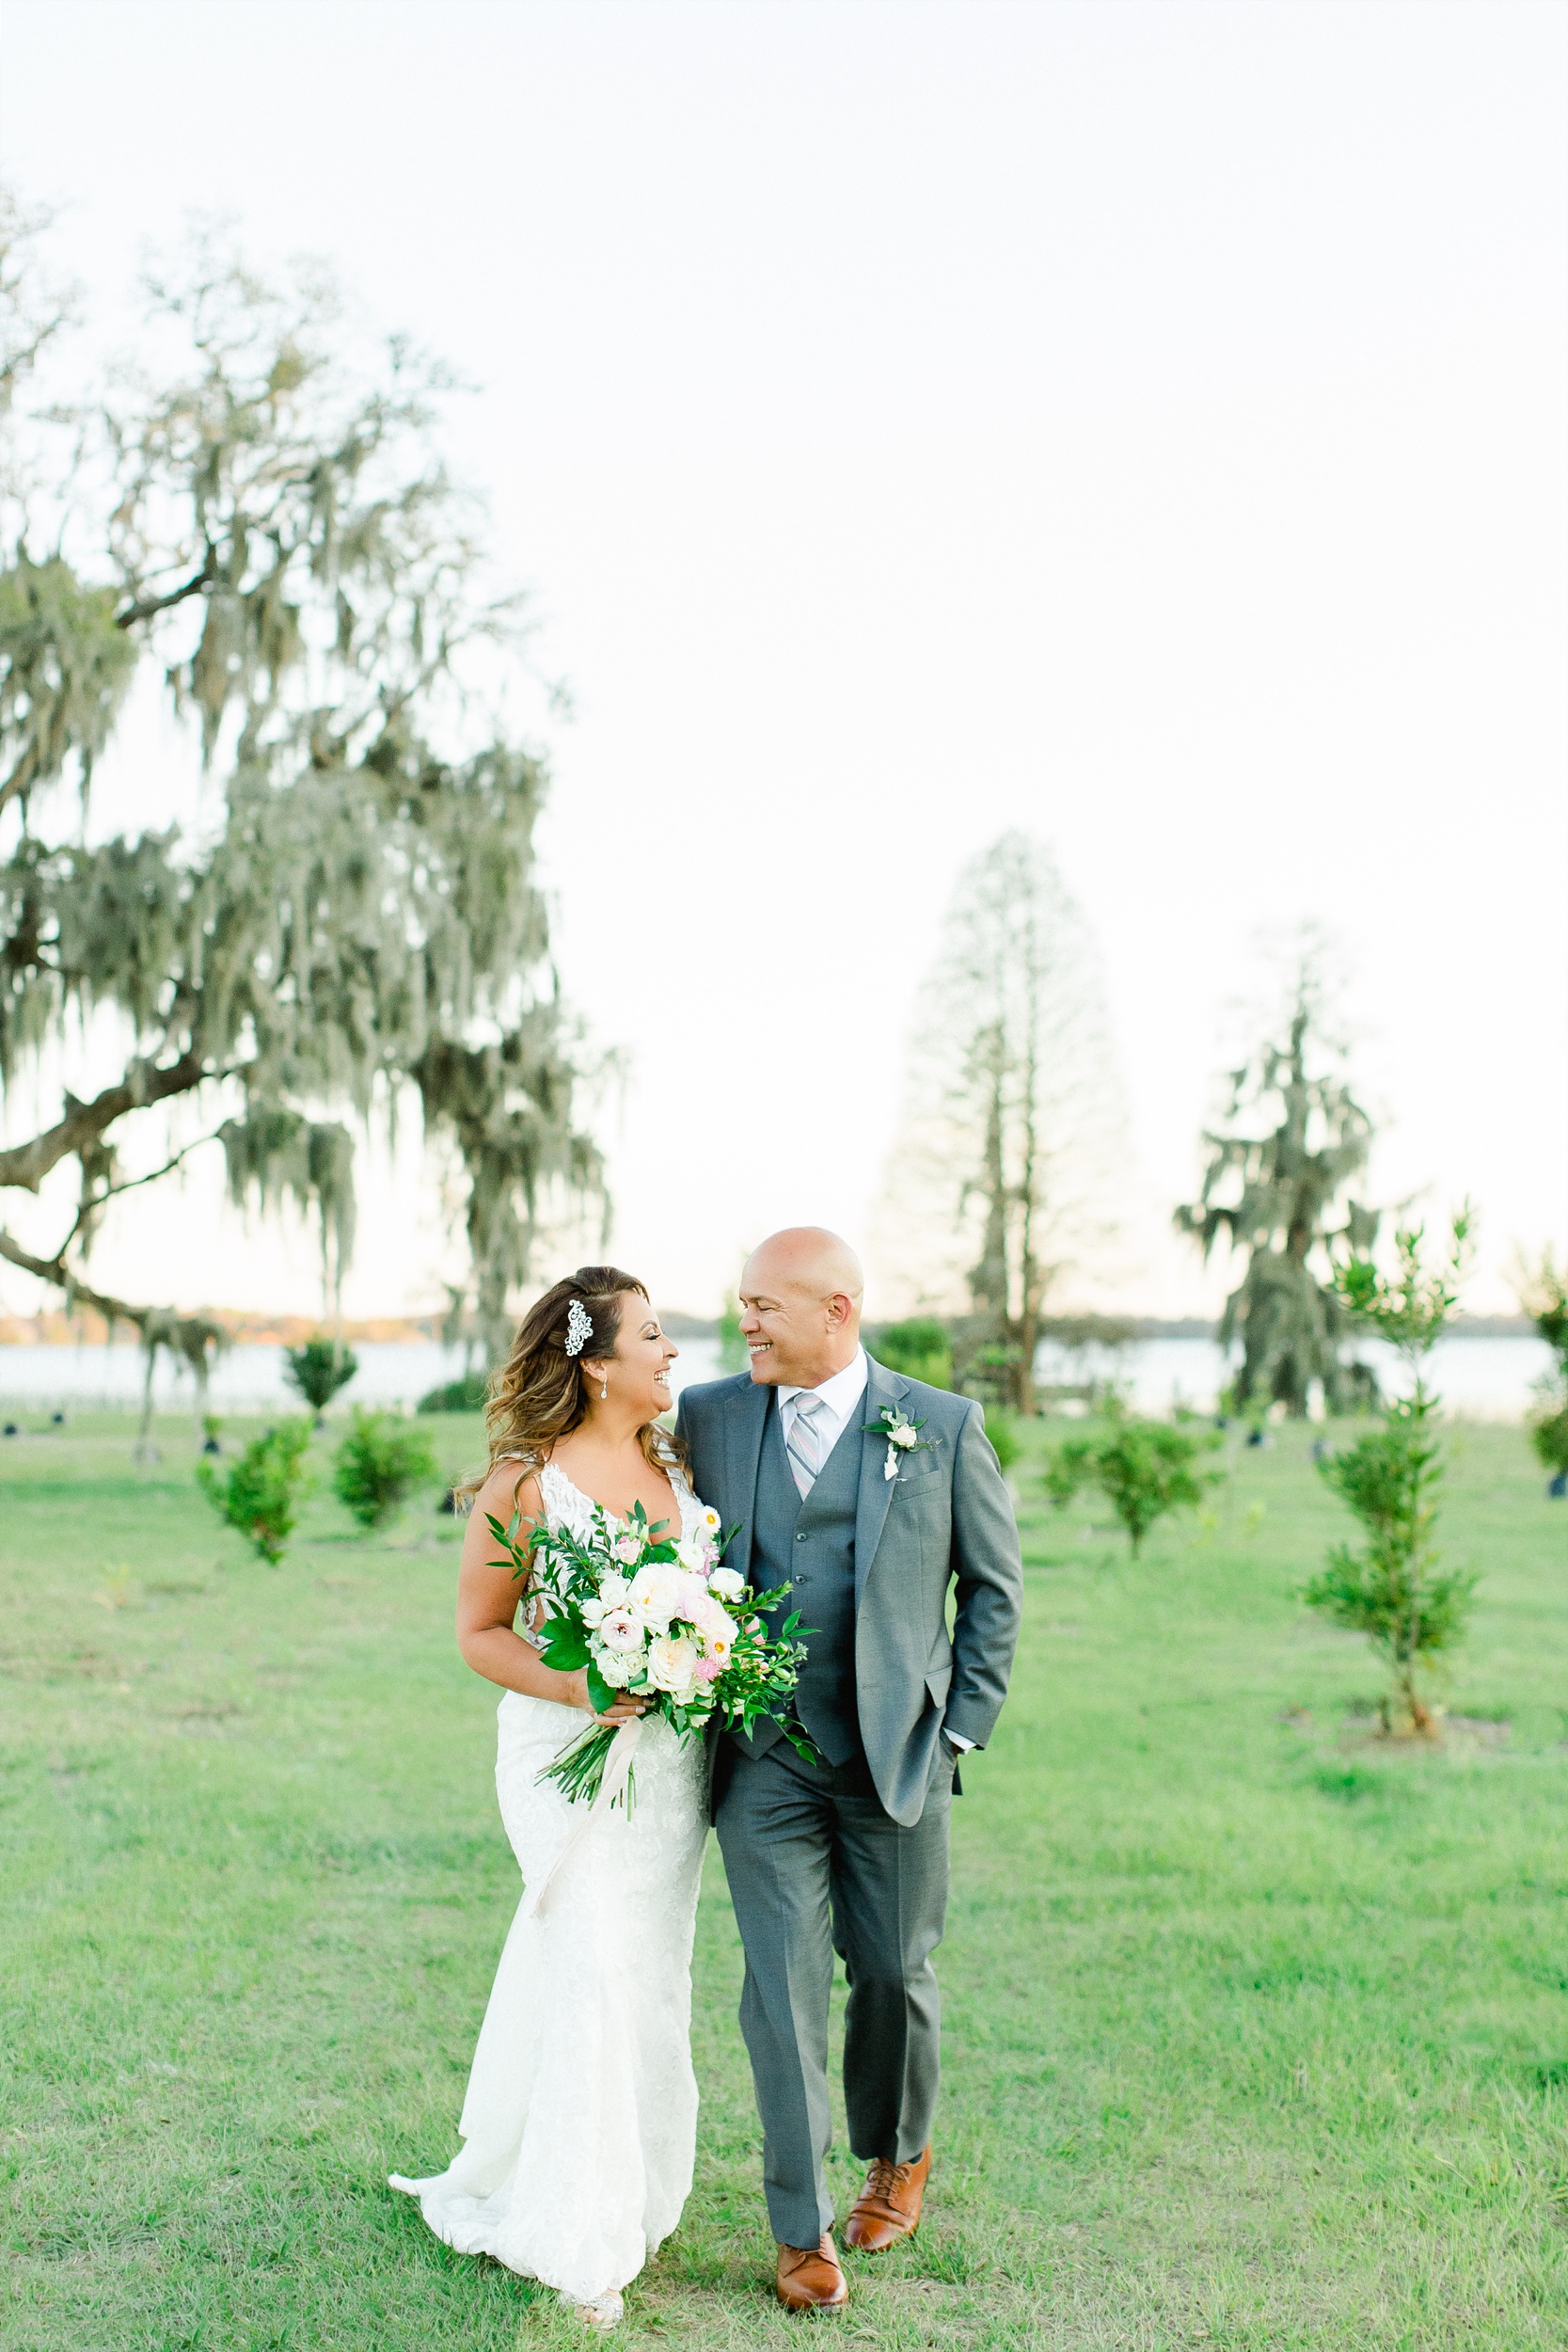 Tampa Wedding Photographer | © Ailyn La Torre Photography 2020